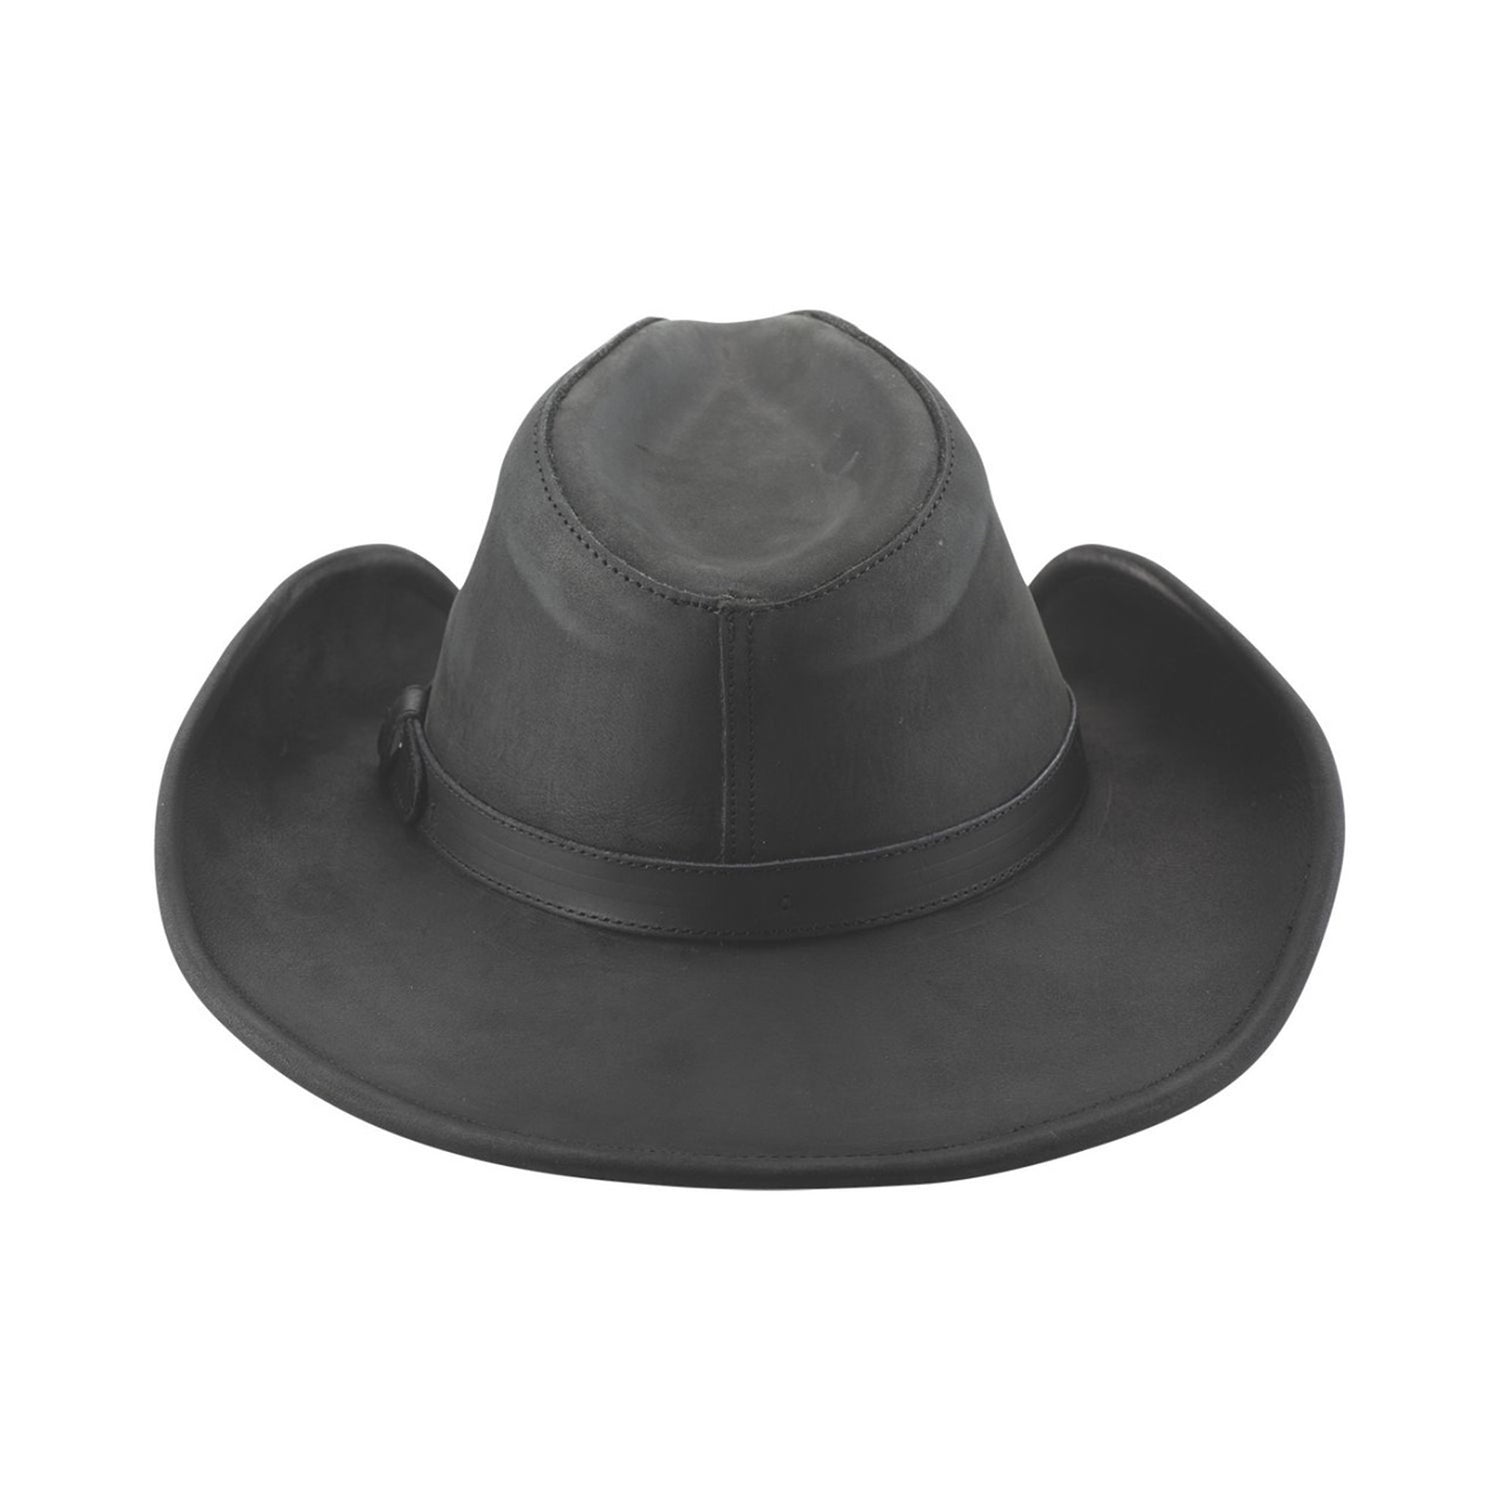 Right Now Leather Cowboy Hat